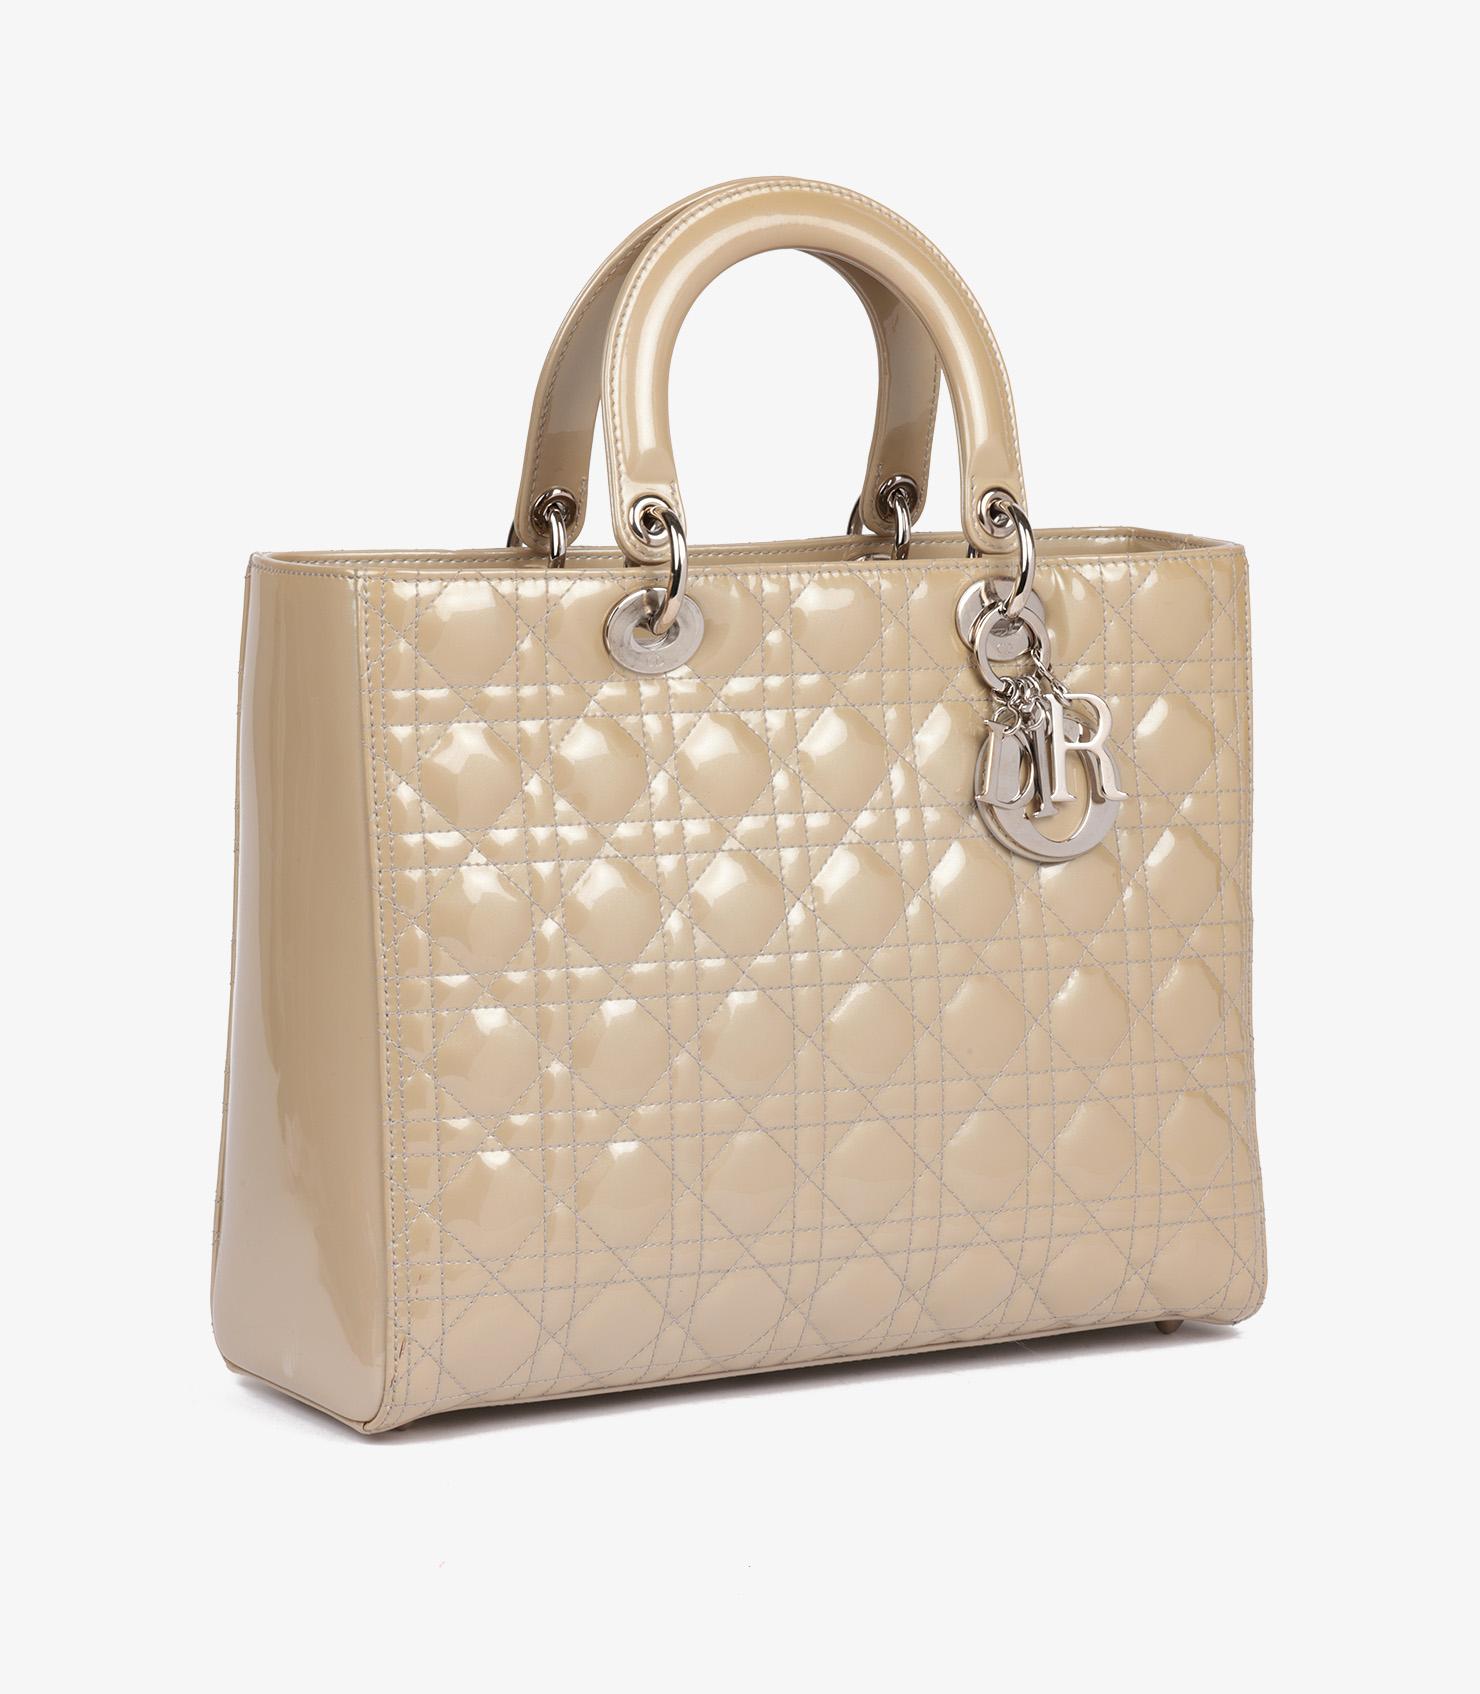 Christian Dior Greige Quilted Iridescent Patent Leather Large Lady Dior

Brand- Christian Dior
Model- Large Lady Dior
Product Type- Shoulder, Tote
Serial Number- 16********
Age- Circa 2012
Accompanied By- Christian Dior Shoulder Strap, Care Booklet,